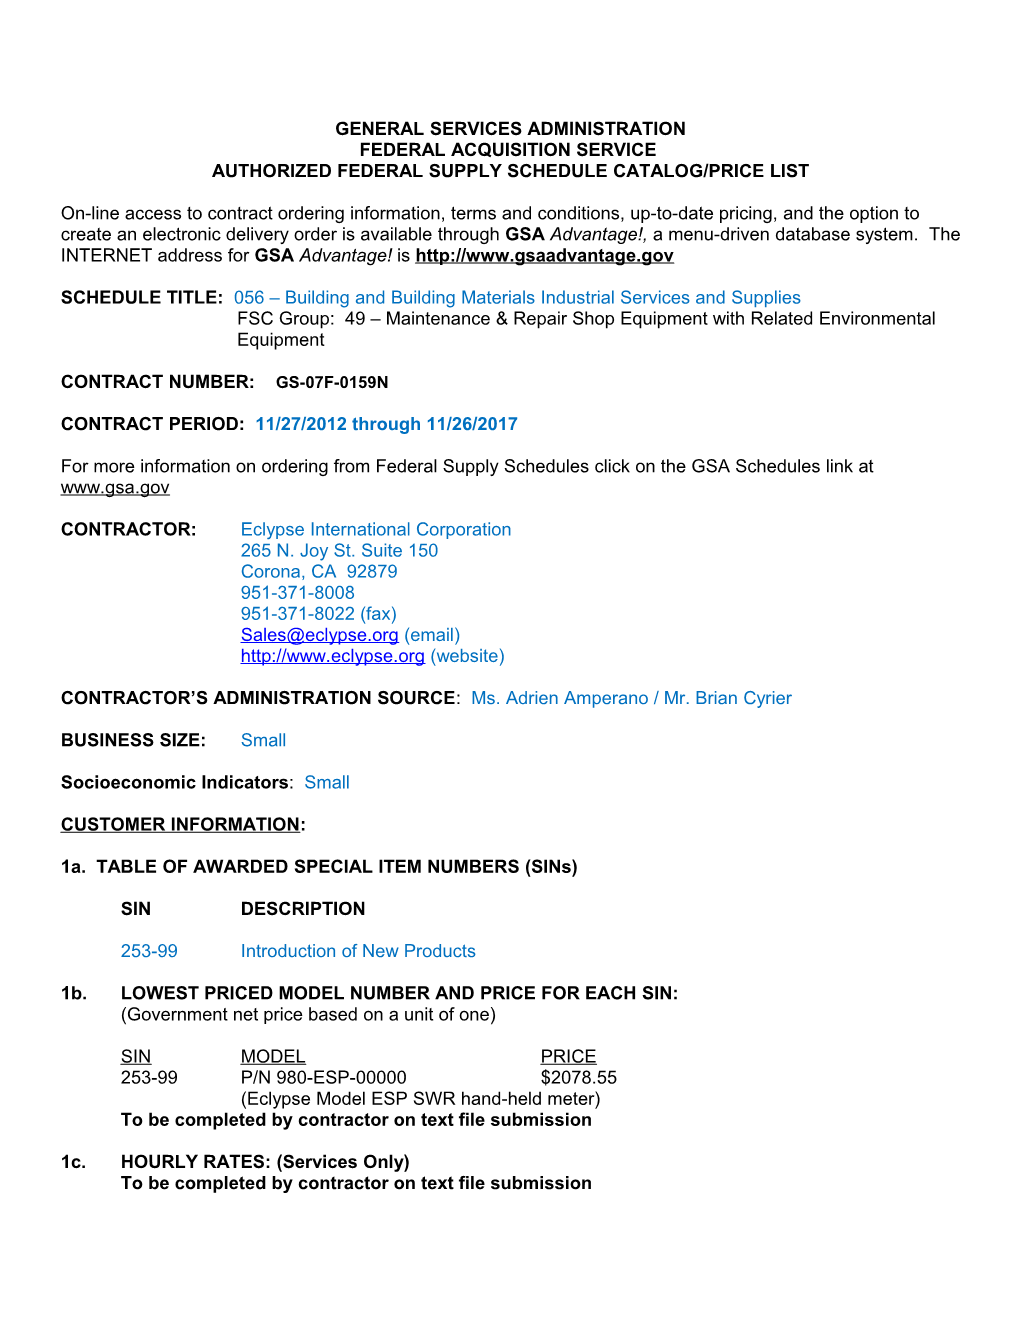 Standard Form 1449, Contract for Commercial Items (Cont D) Page 1A s7